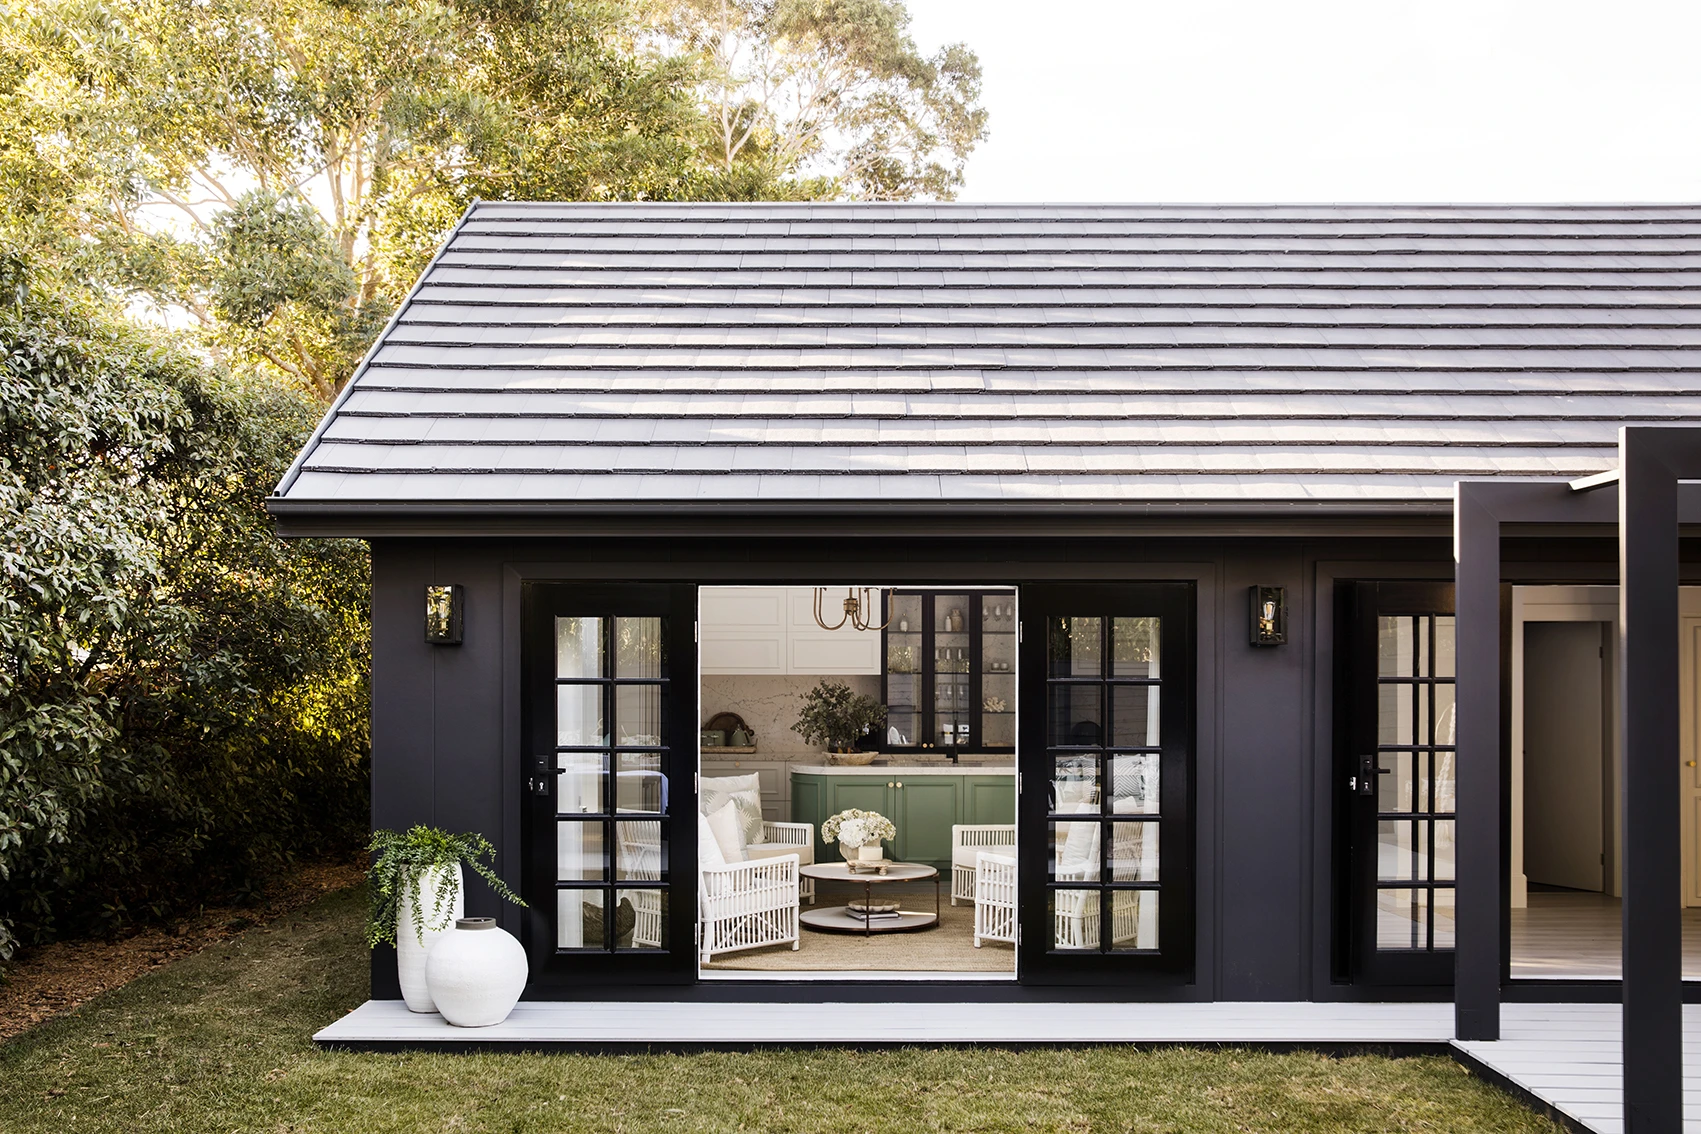 Exterior: Domino
Decking: Colorbond Shale Grey

Black exterior:  The Bold Extension – House 9 by Three Birds Renovations. 